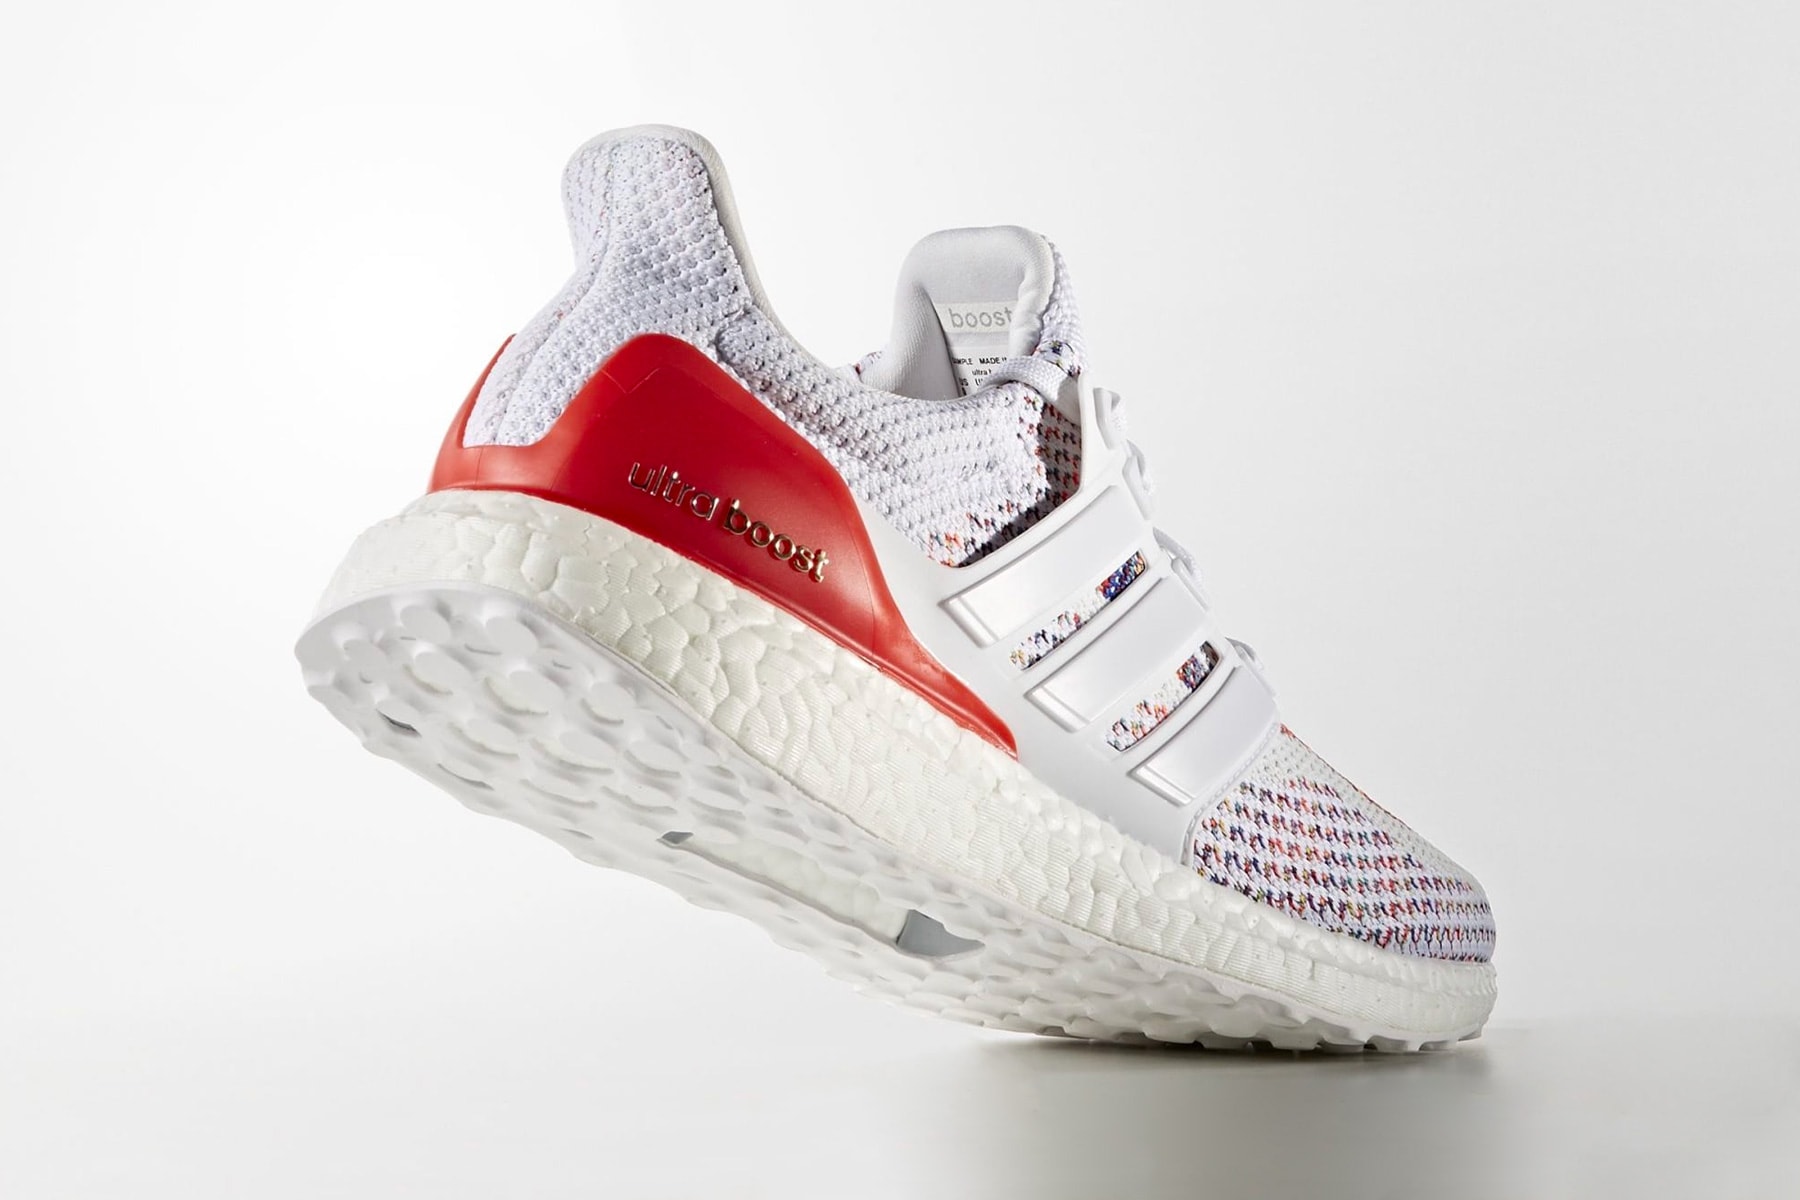 adidas UltraBOOST "Multicolor 2.0" Release Date colorway white sneaker multicolor red price info buy online purchase